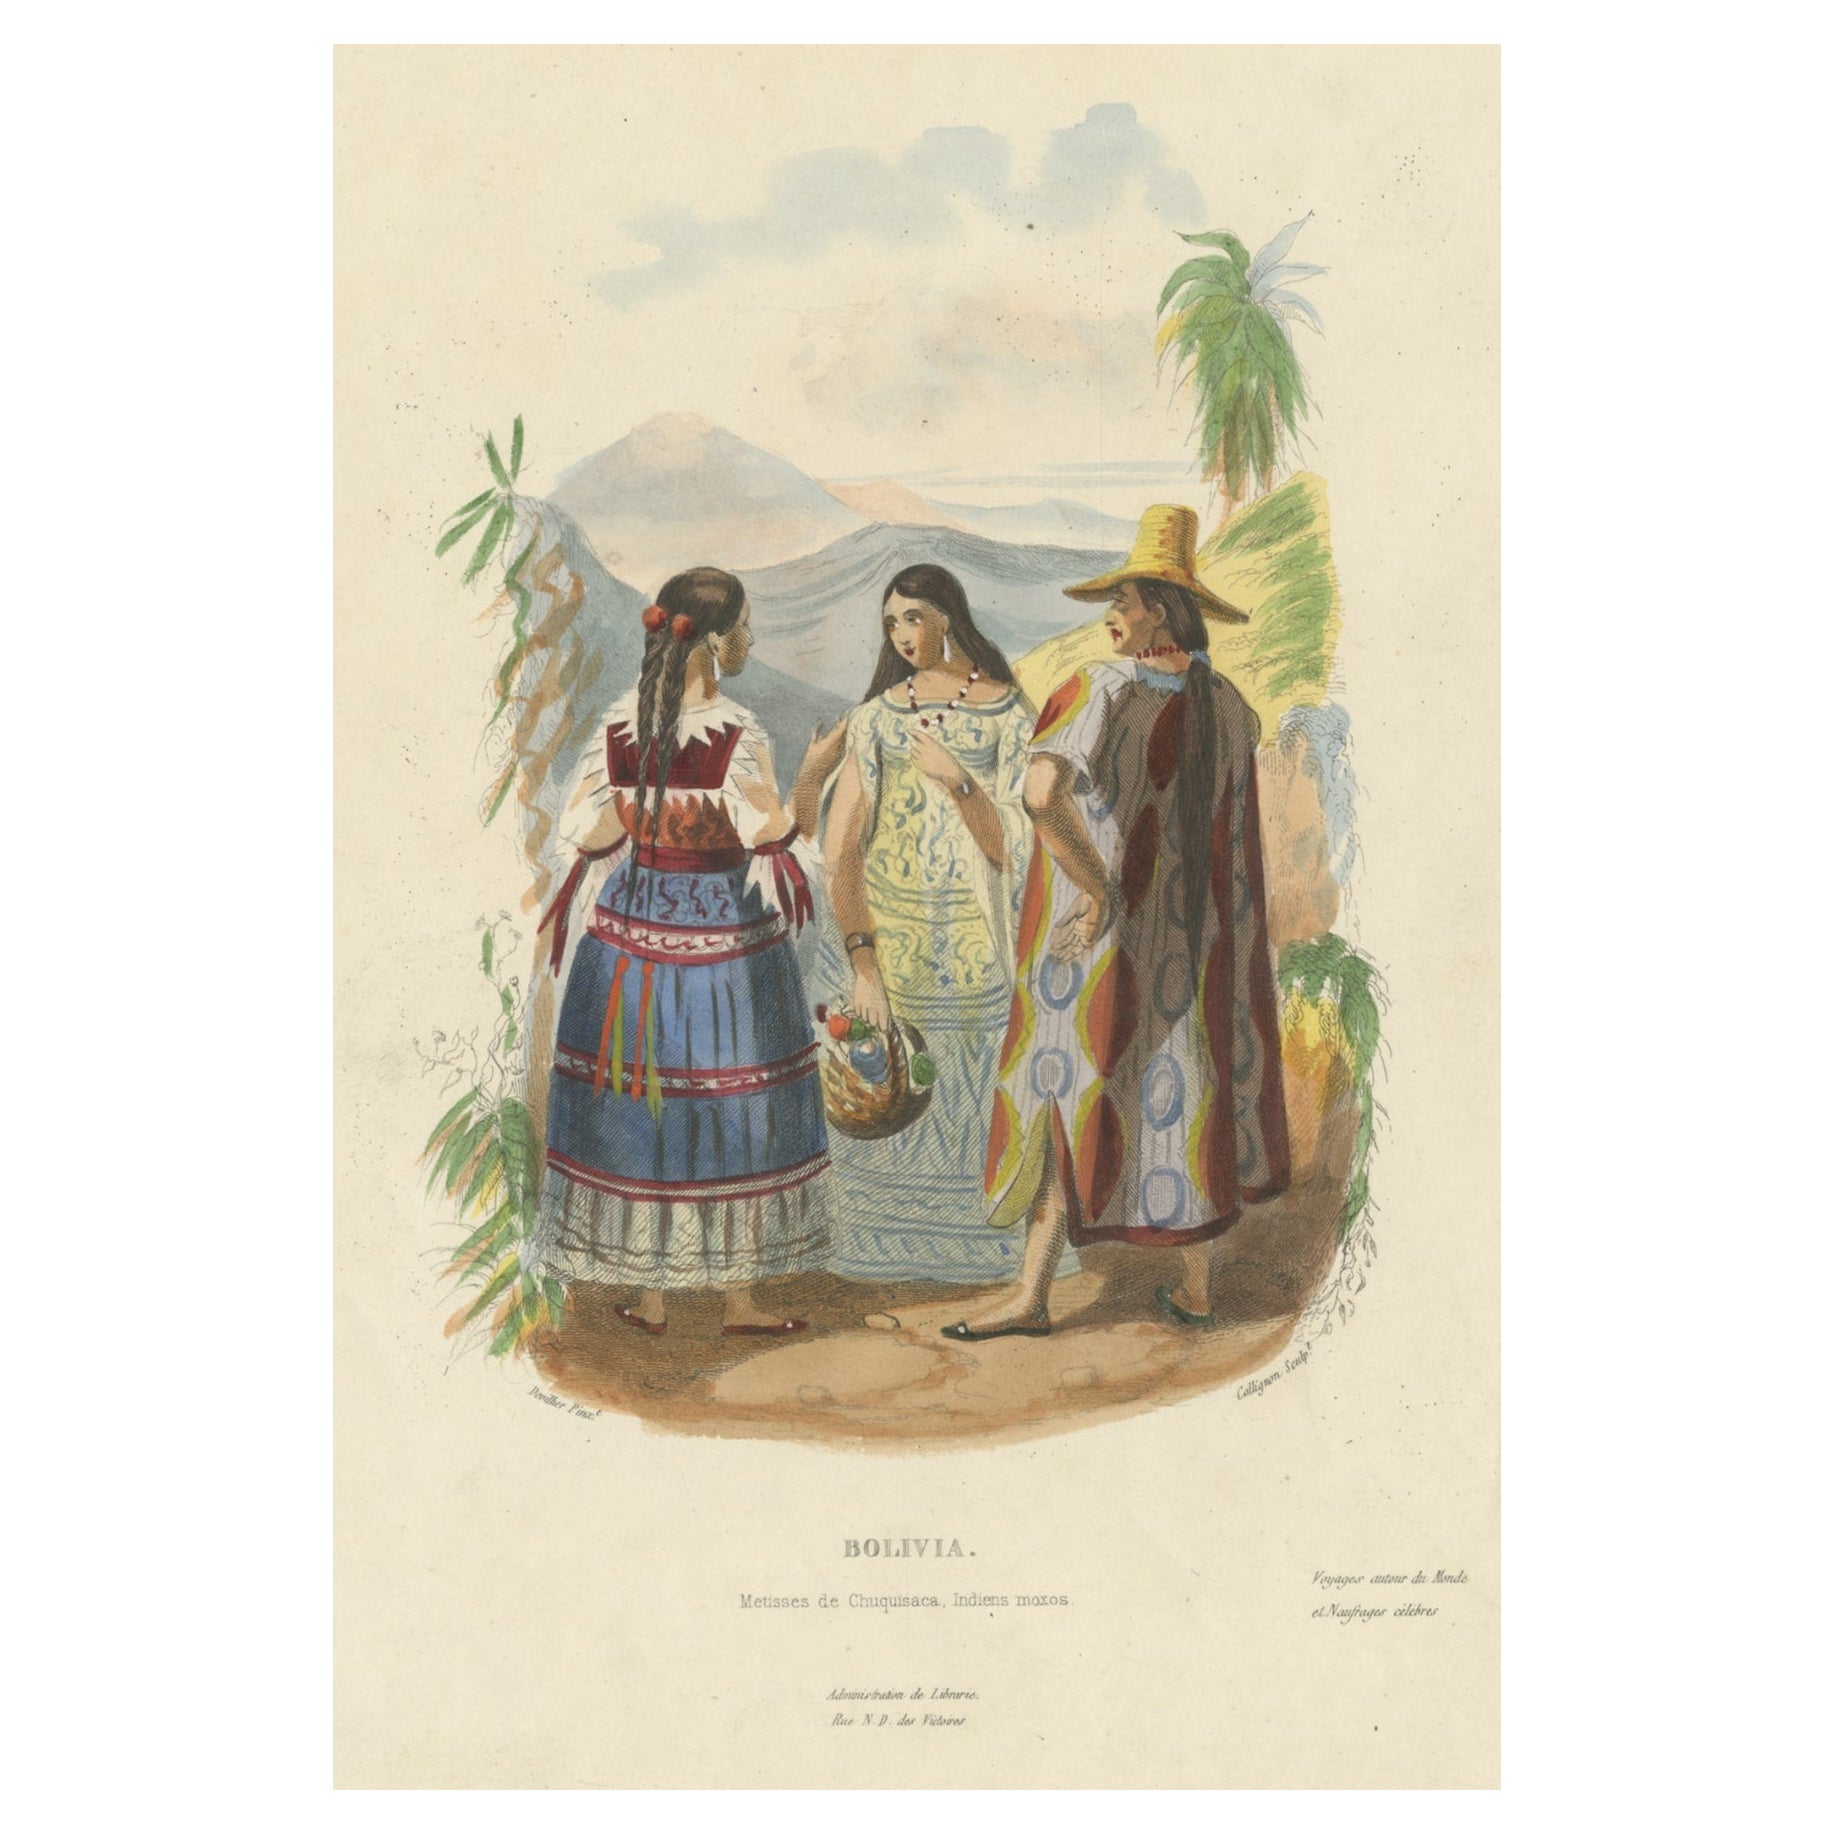 Original Antique Print of Two Women and a Man from Bolivia, South America, 1843 For Sale